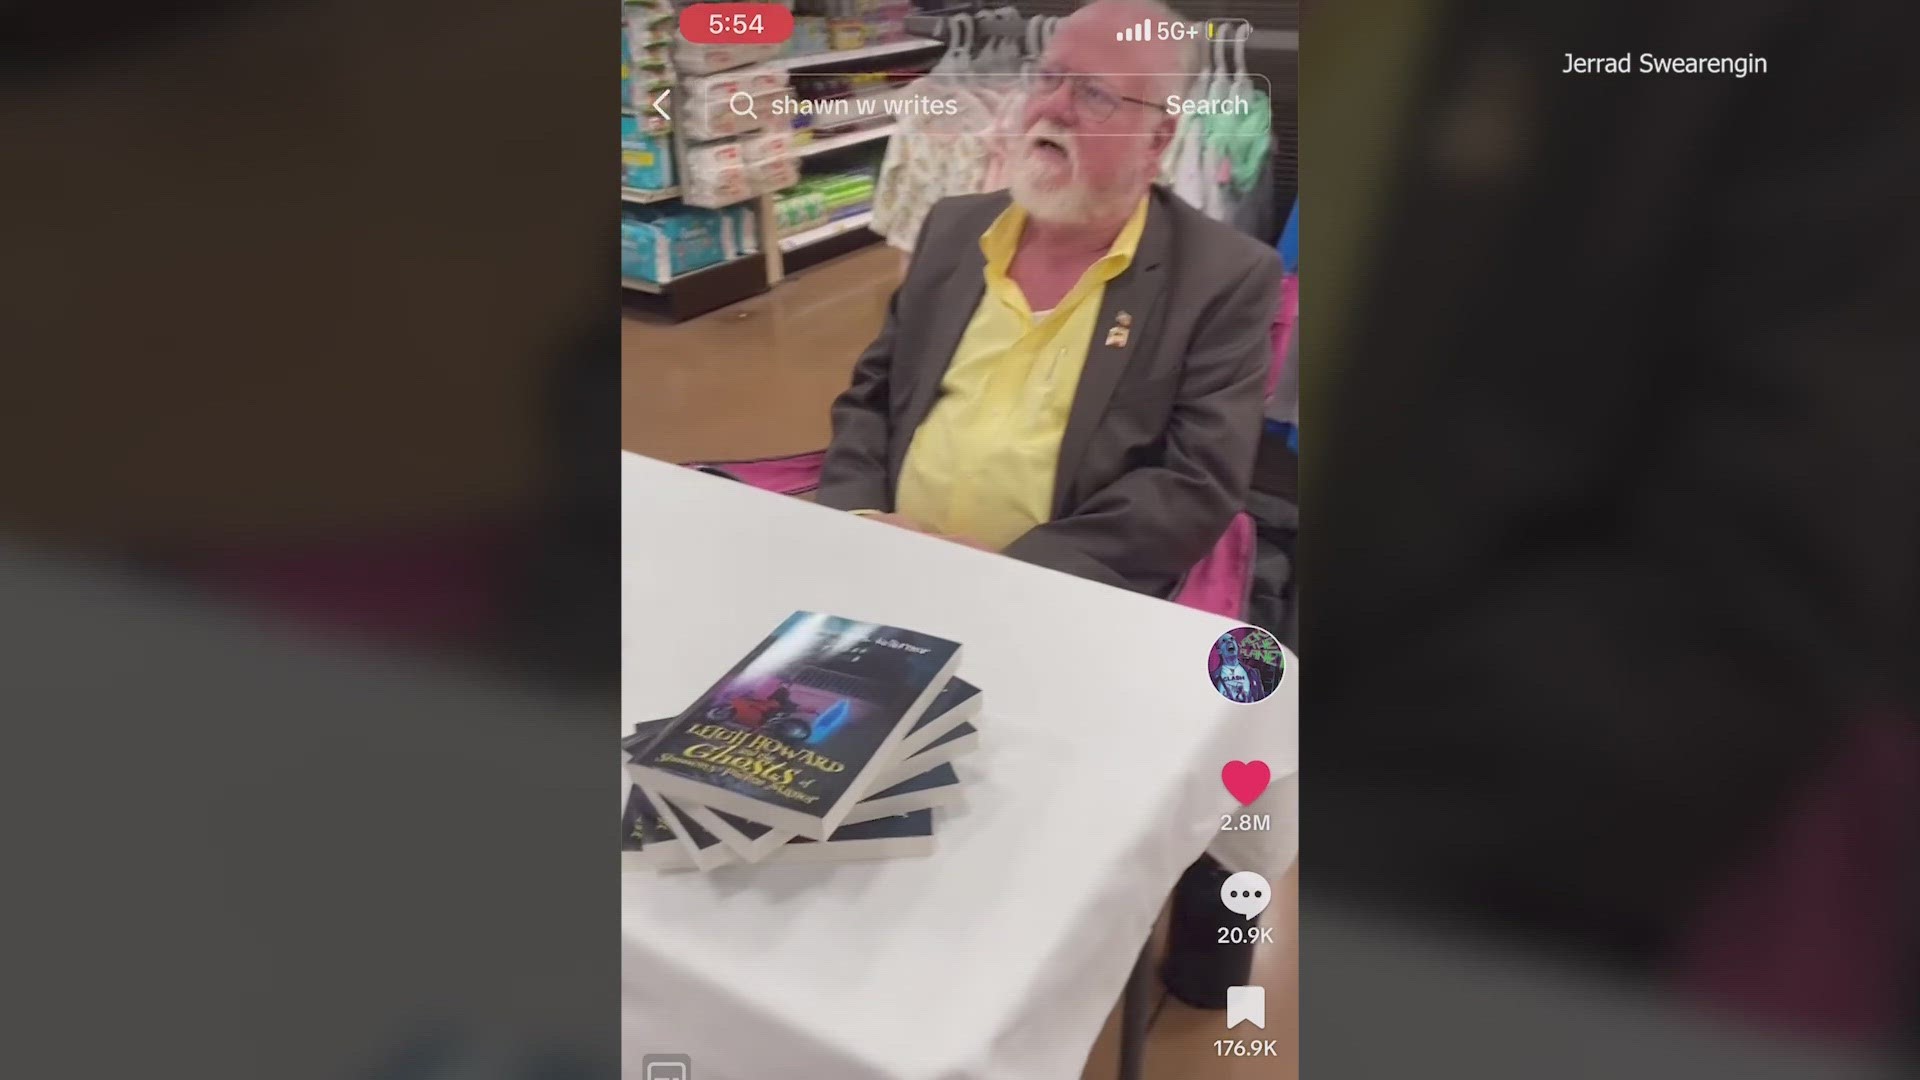 A TikTok video that has gone viral just goes to show what a small act of kindness can do. This one has changed the life of an author from Arlington, Texas.